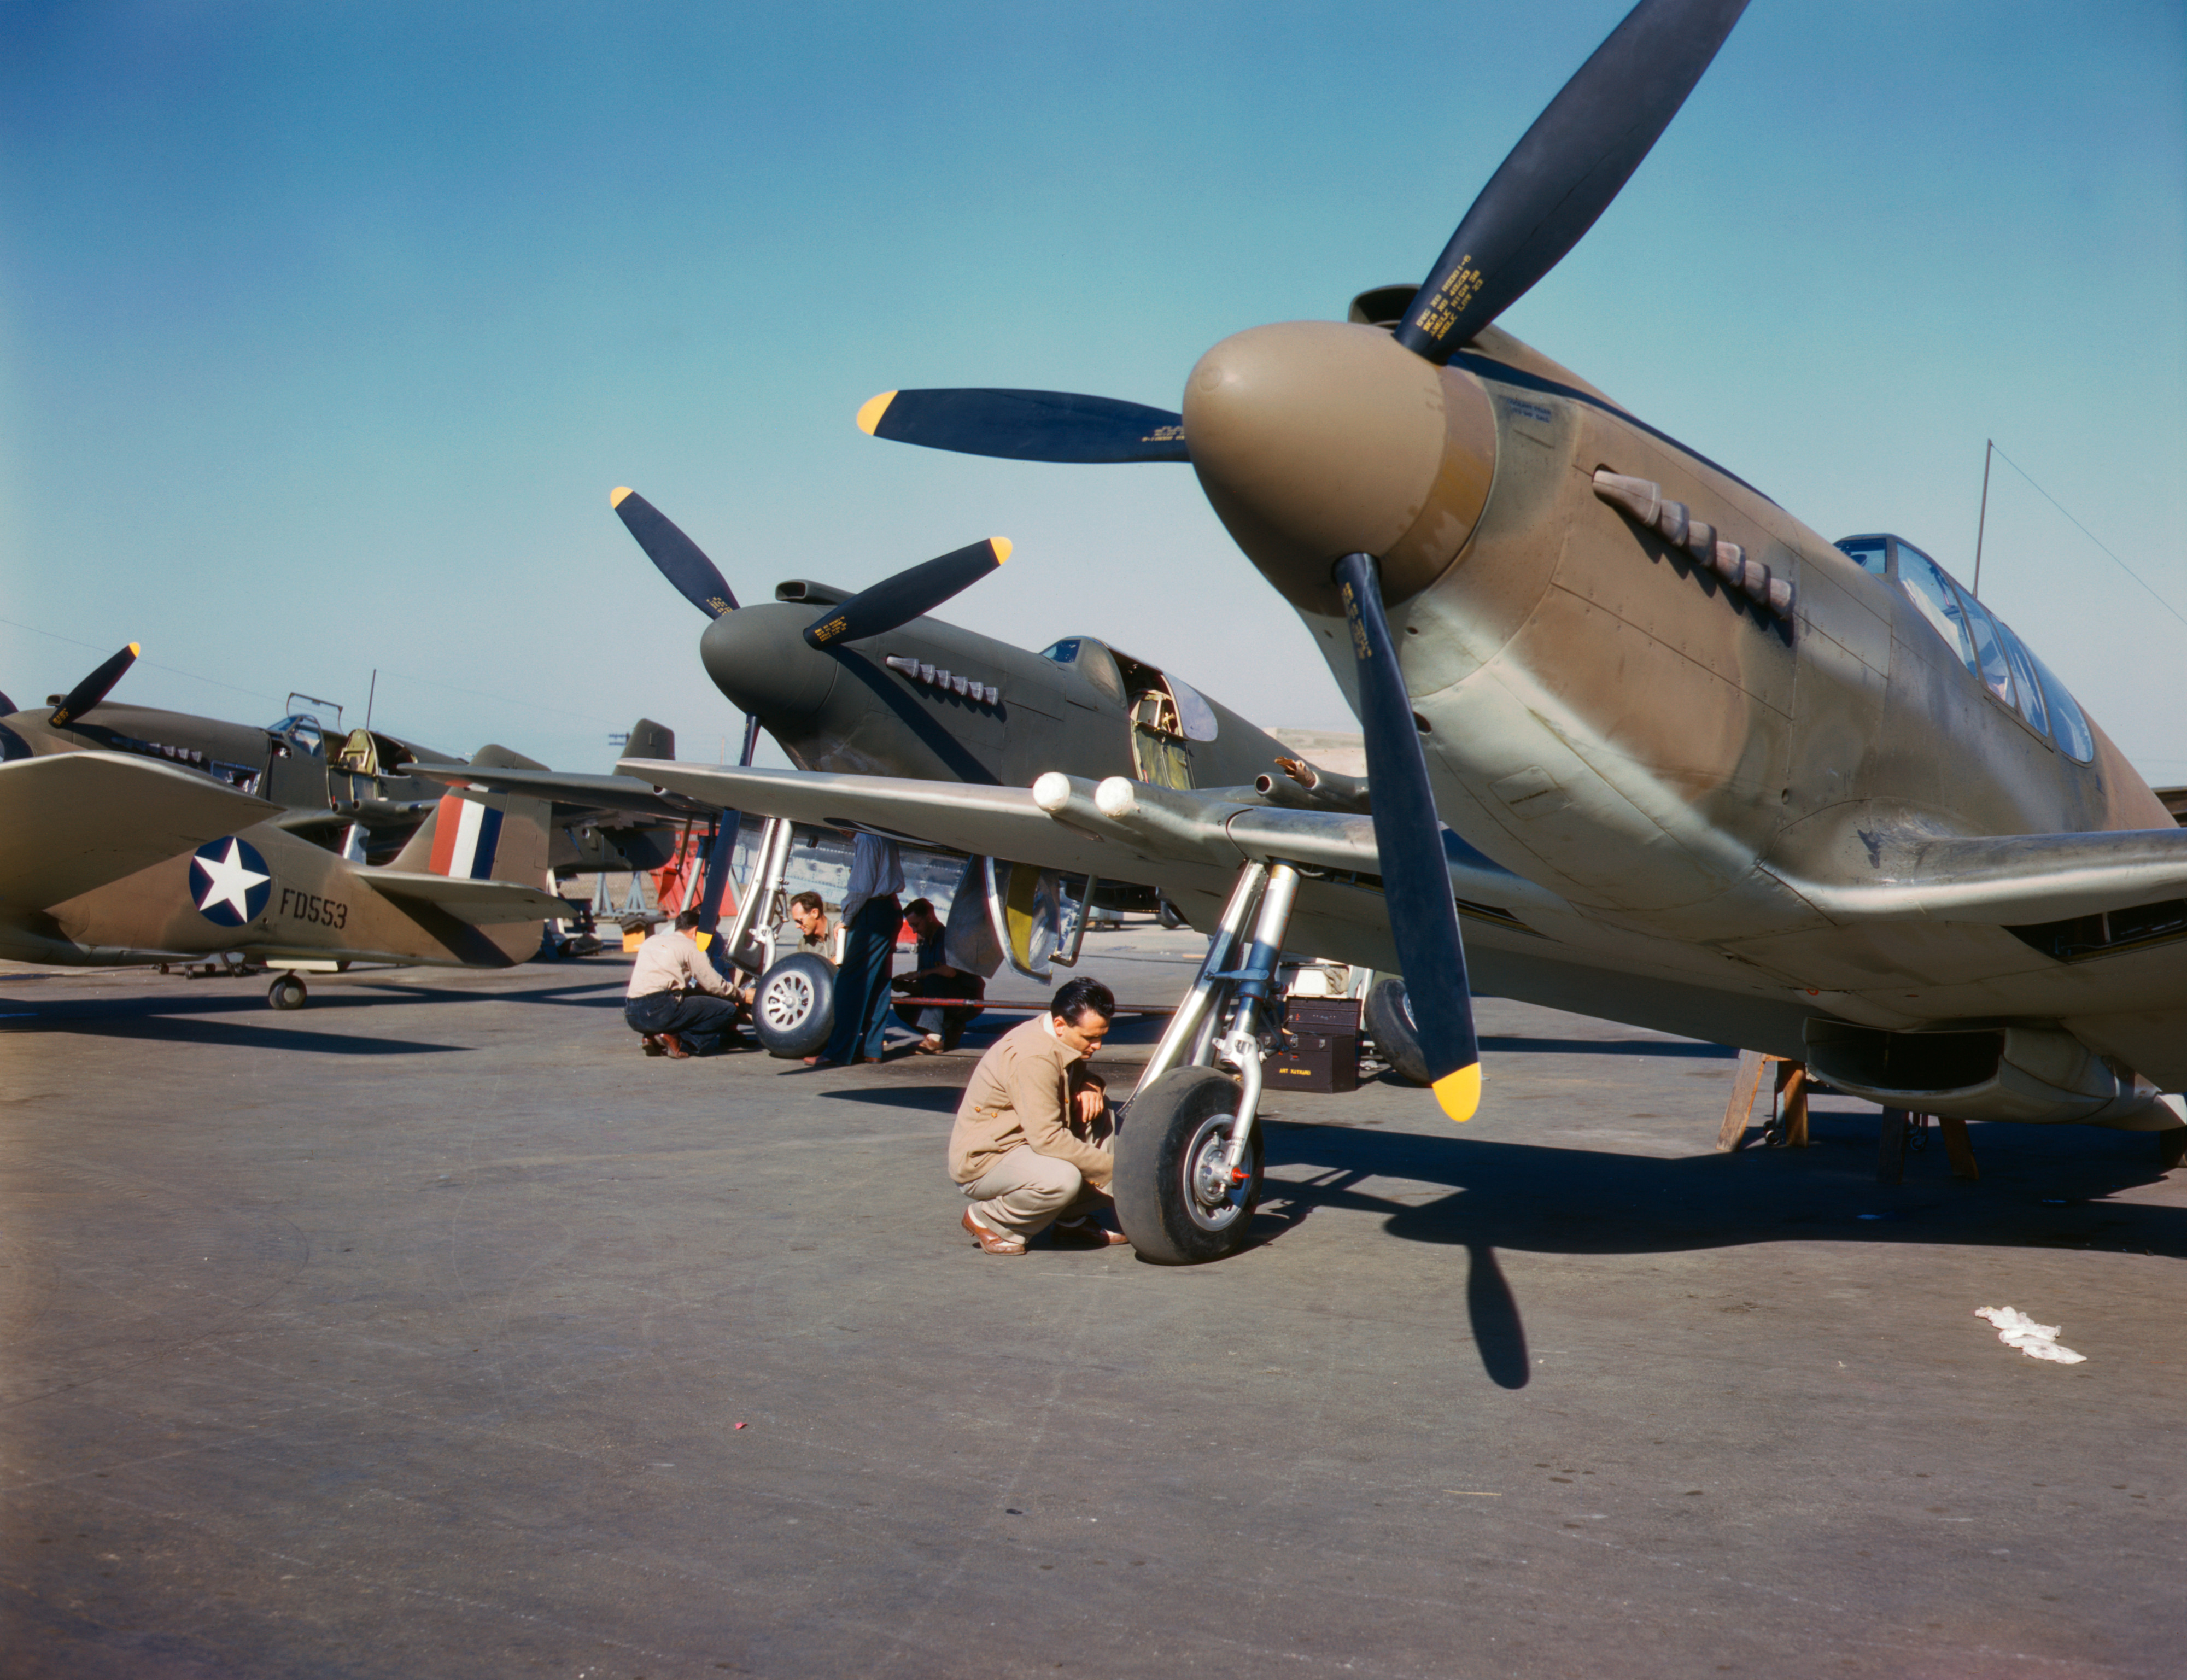 P-51 Mustang fighters being prepared for test flight, North American Aviation, Inglewood, California, United States, Oct 1942